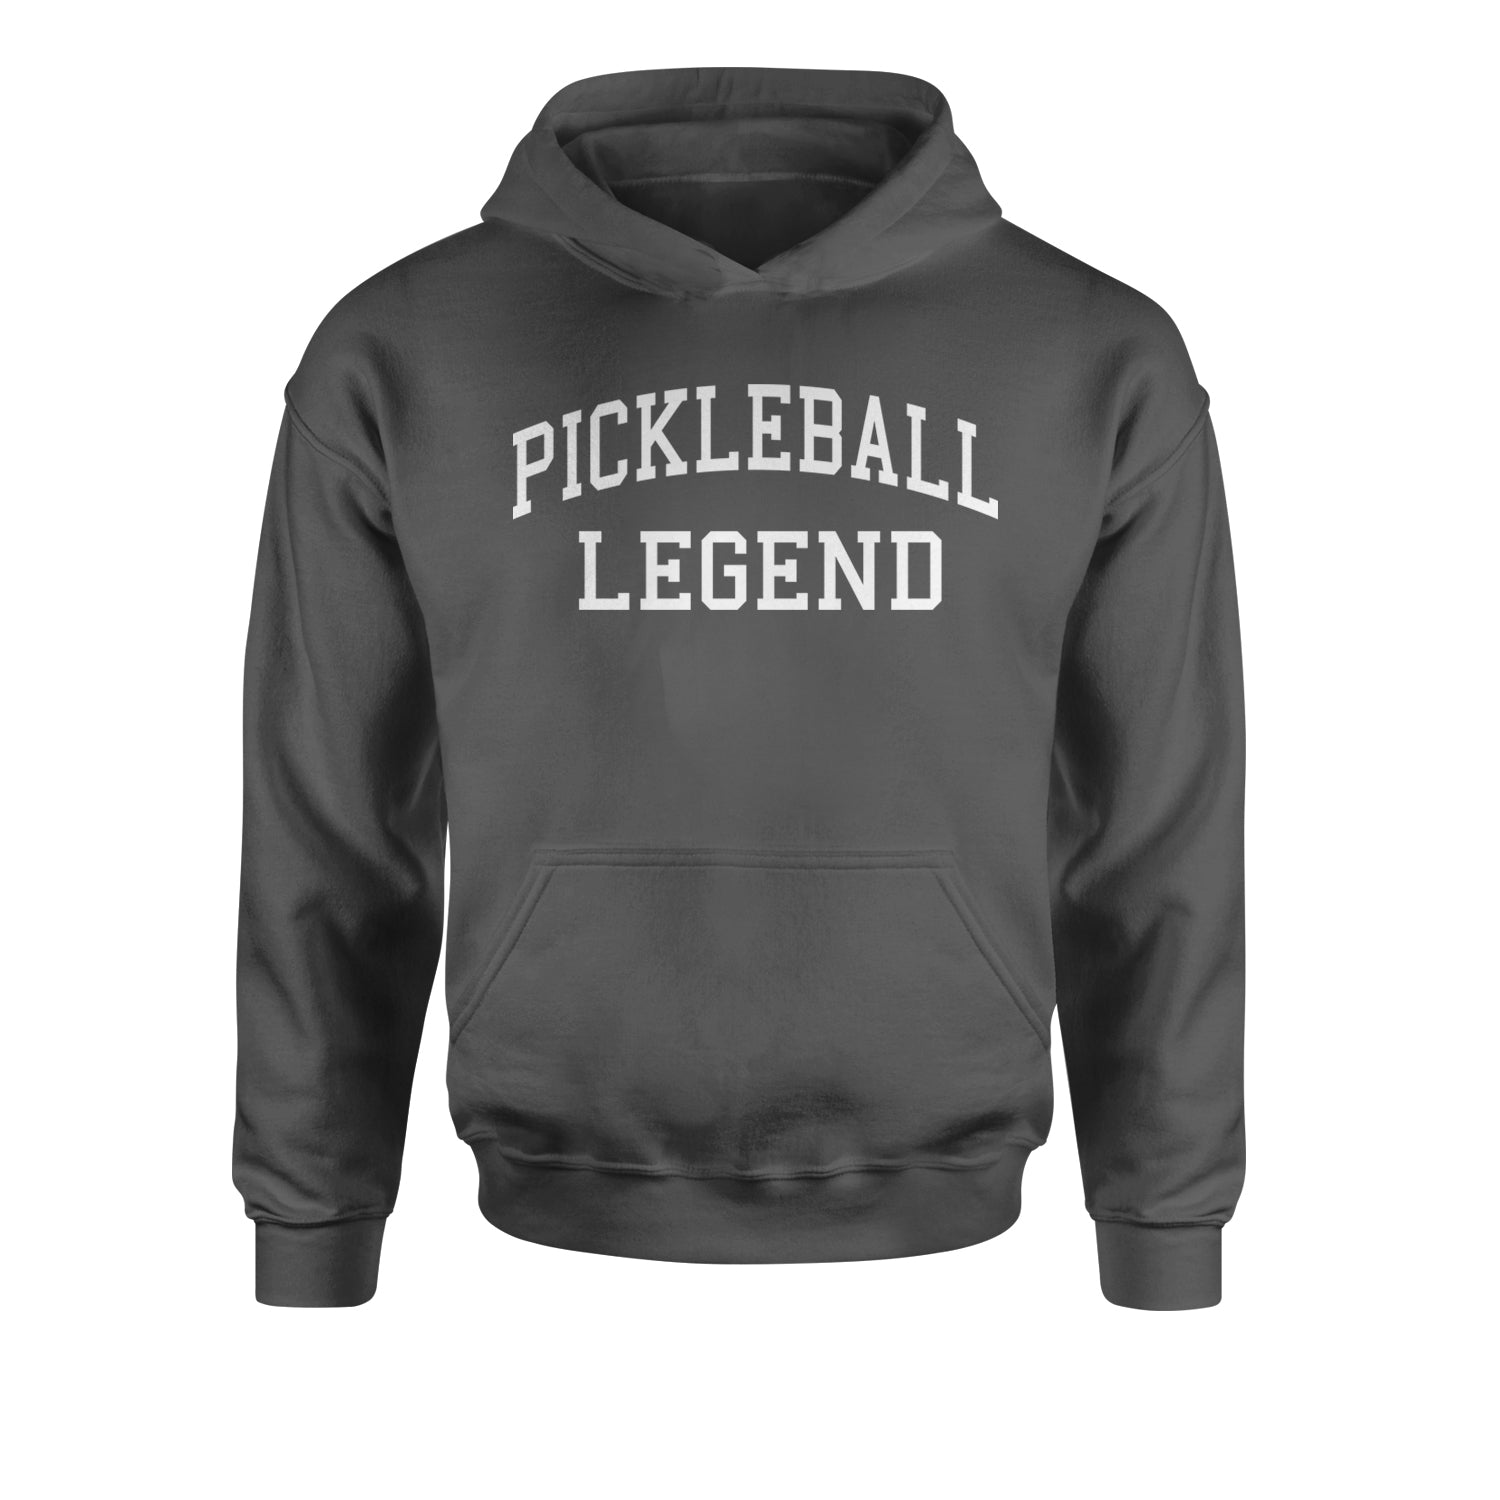 Pickleball Legend Youth-Sized Hoodie ball, dink, dinking, pickle, pickleball by Expression Tees